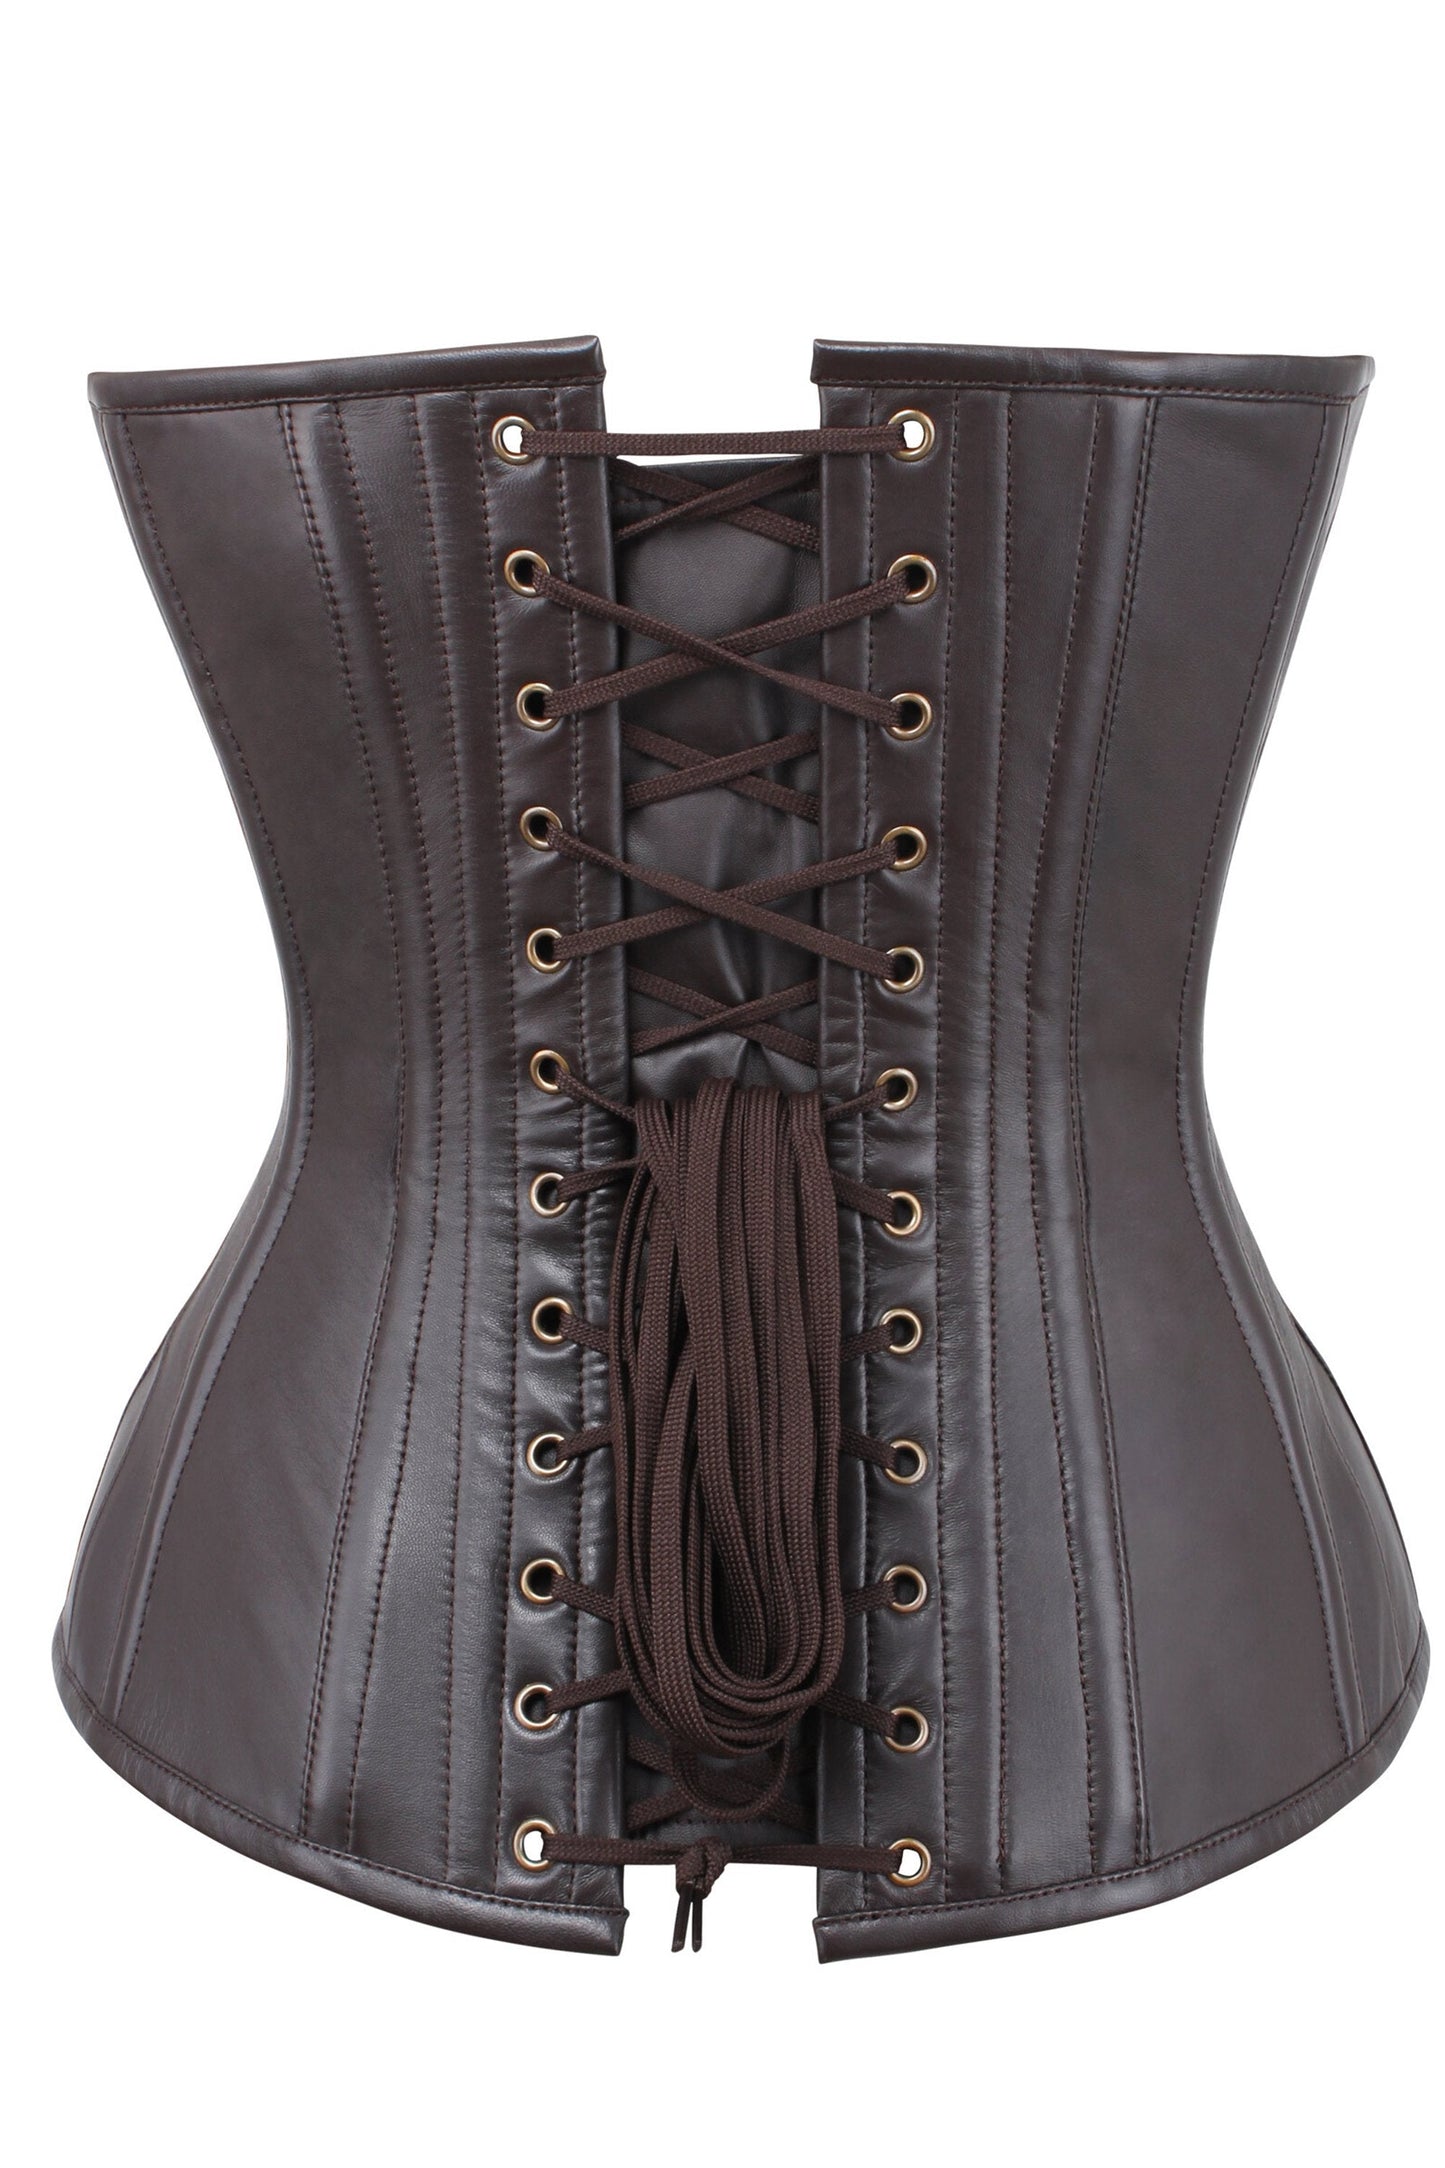 Pasek Brown Sheep Nappa Leather Steampunk Overbust Corset